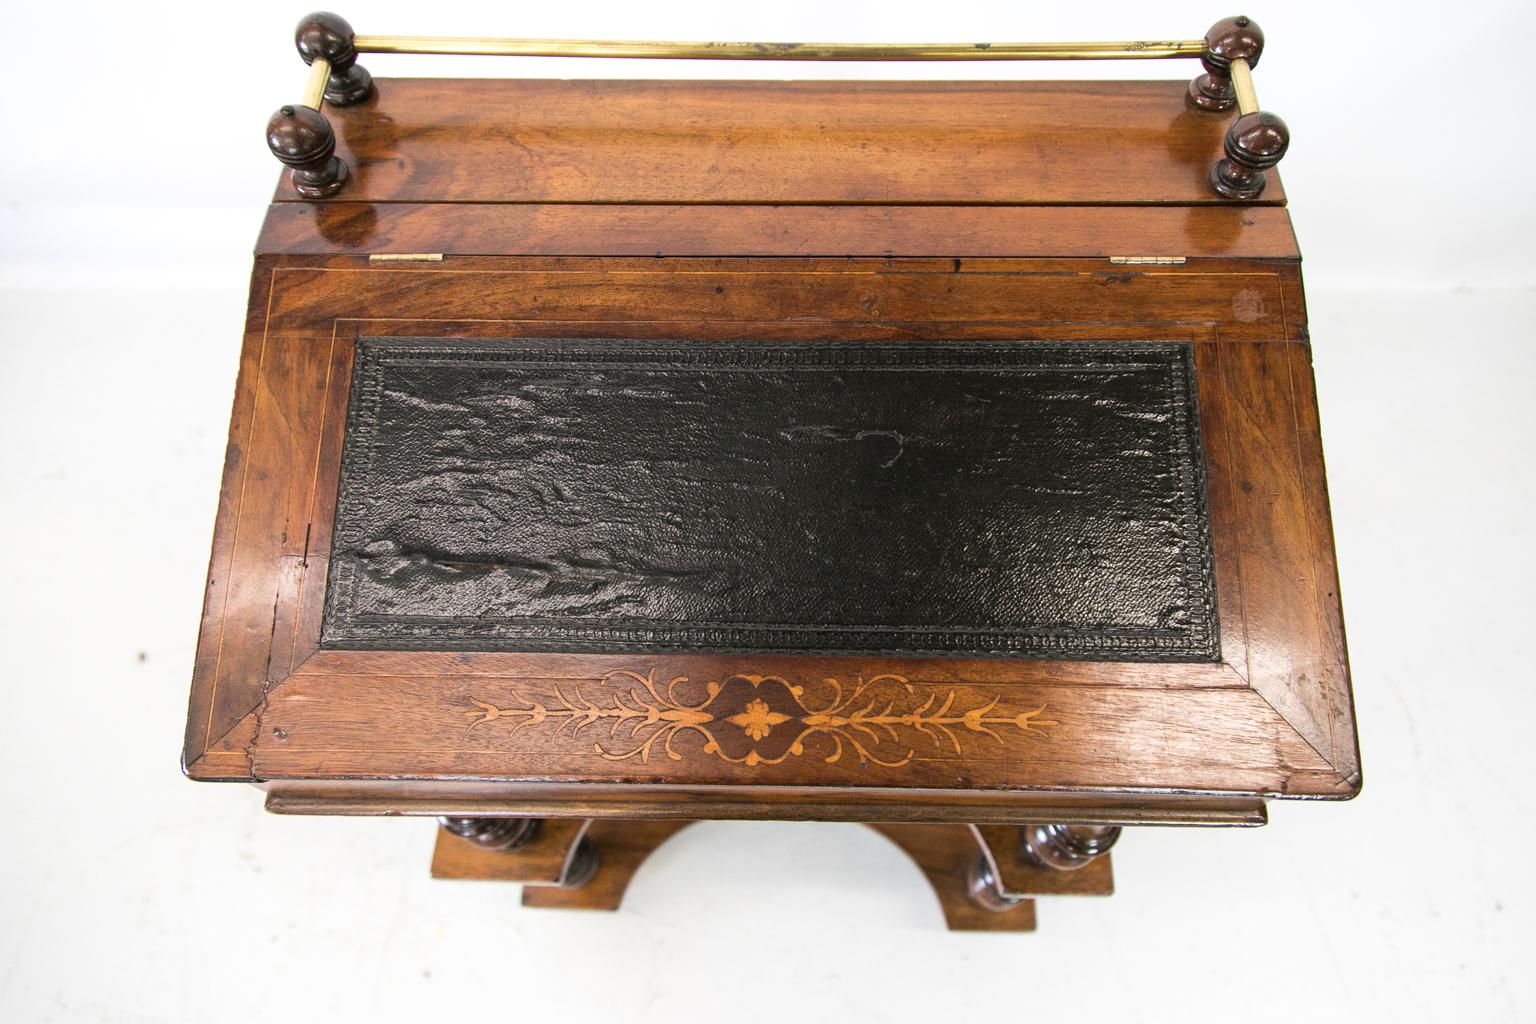 Inlaid English walnut slant top desk with shelves has a slant top that lifts to expose a storage compartment. The top has a brass gallery with wooden baluster supports. The slant front has a black leather blind tool leather insert that is framed